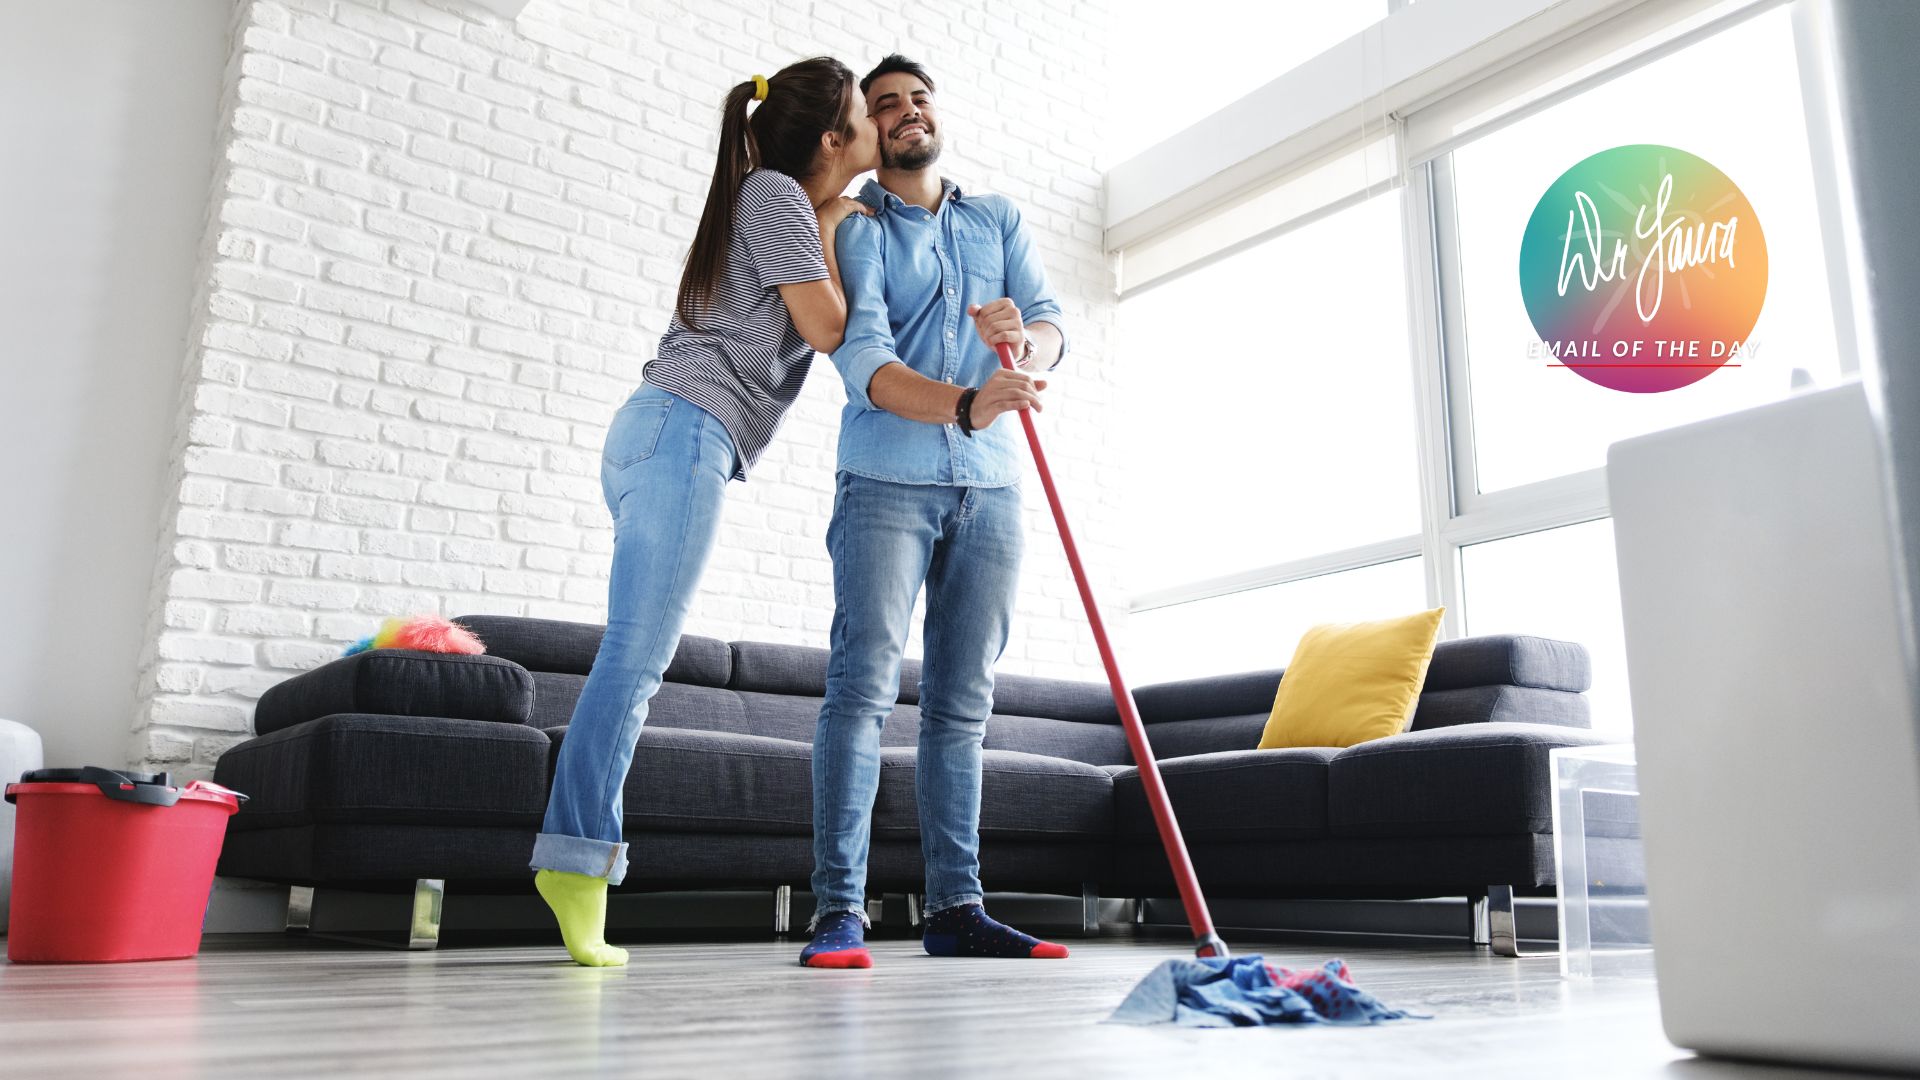 Woman in grey shirt stands on her toes to kiss man in blue button-up while he mops the floor